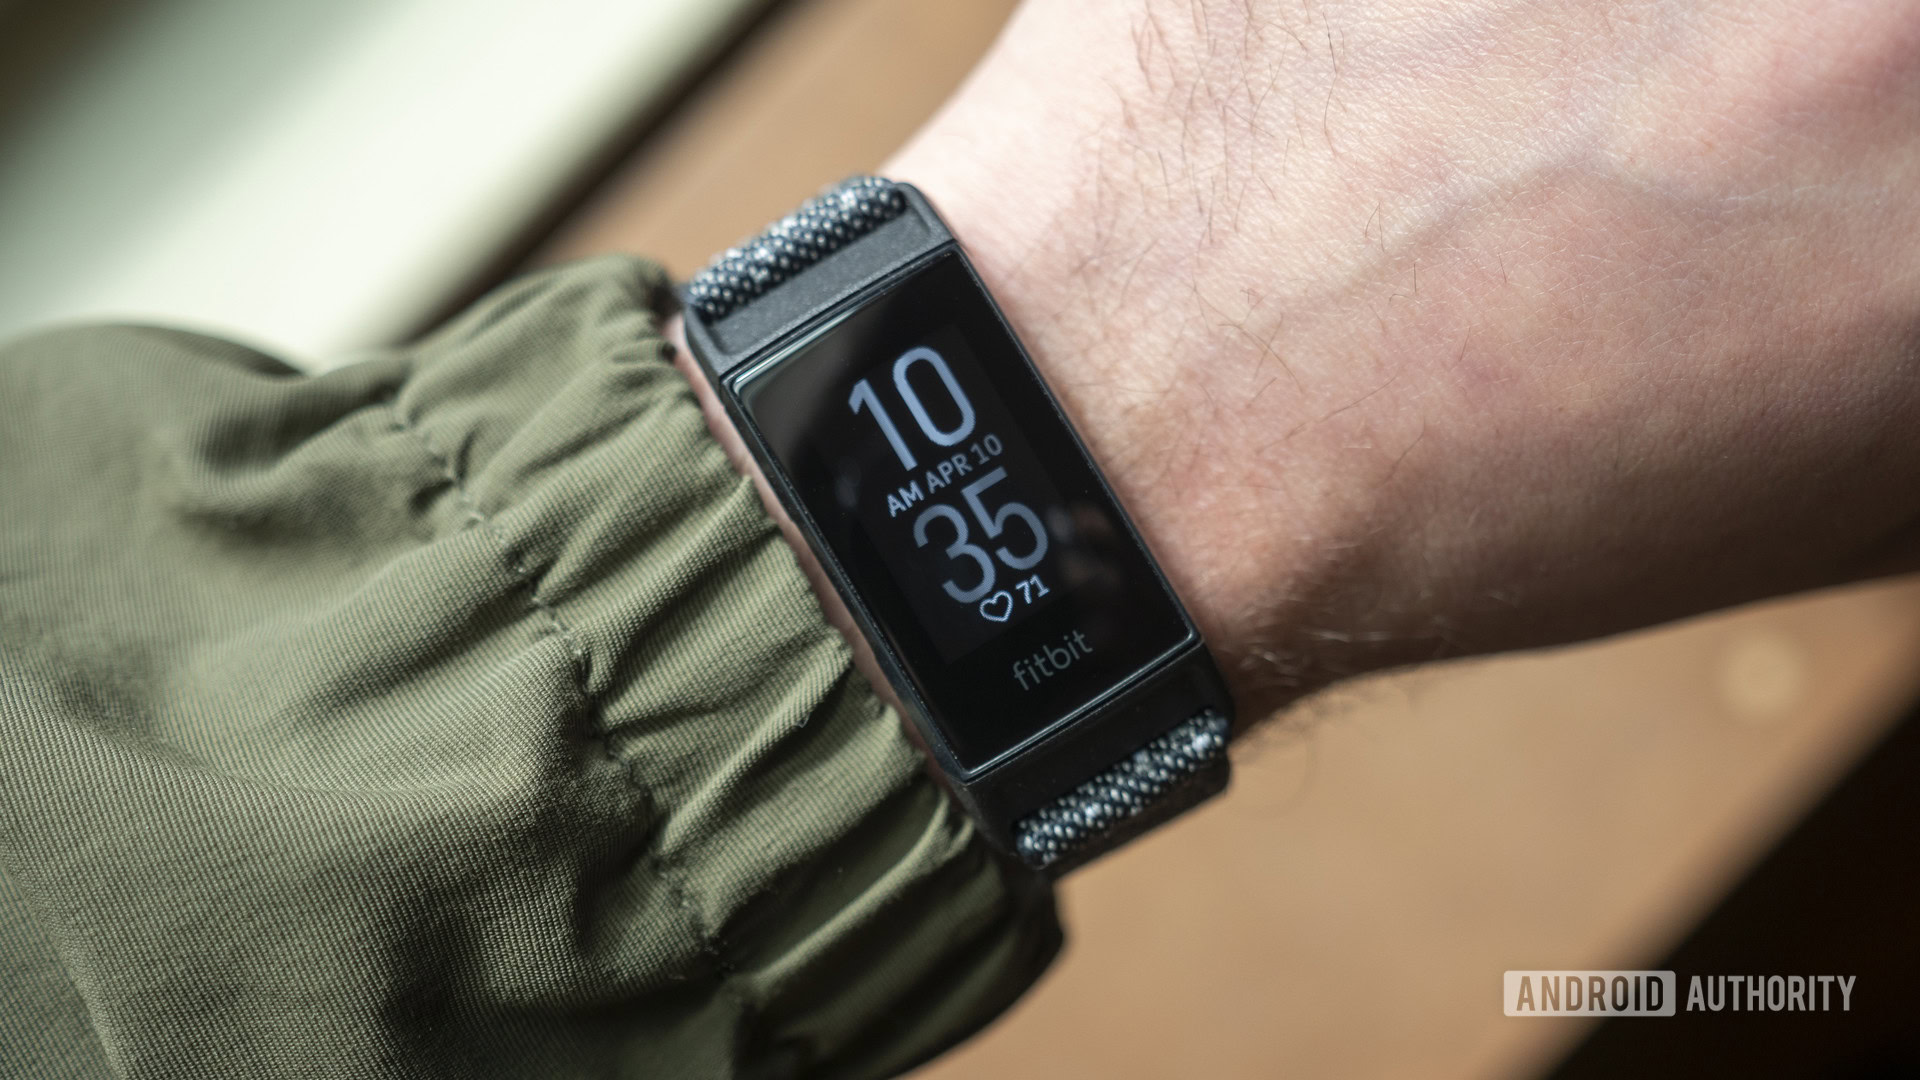 Introducing Fitbit Charge 4 